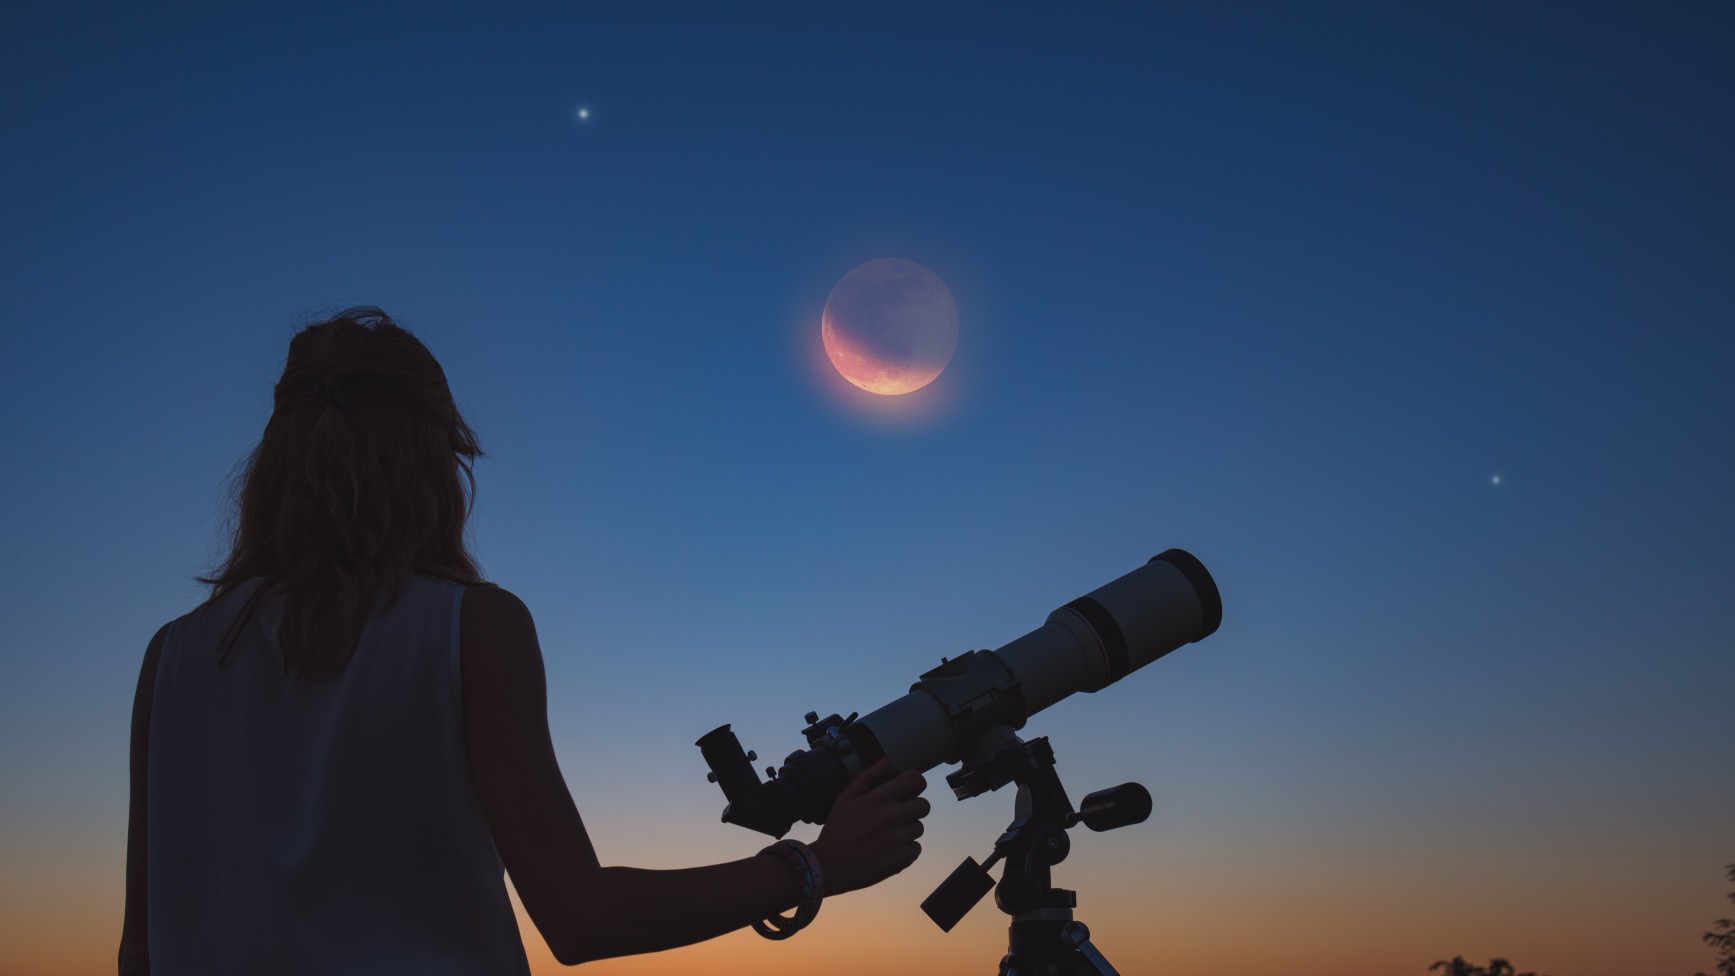 2 planets will align with the 'Earth-shining' moon on the summer solstice. Here's how to watch. thumbnail